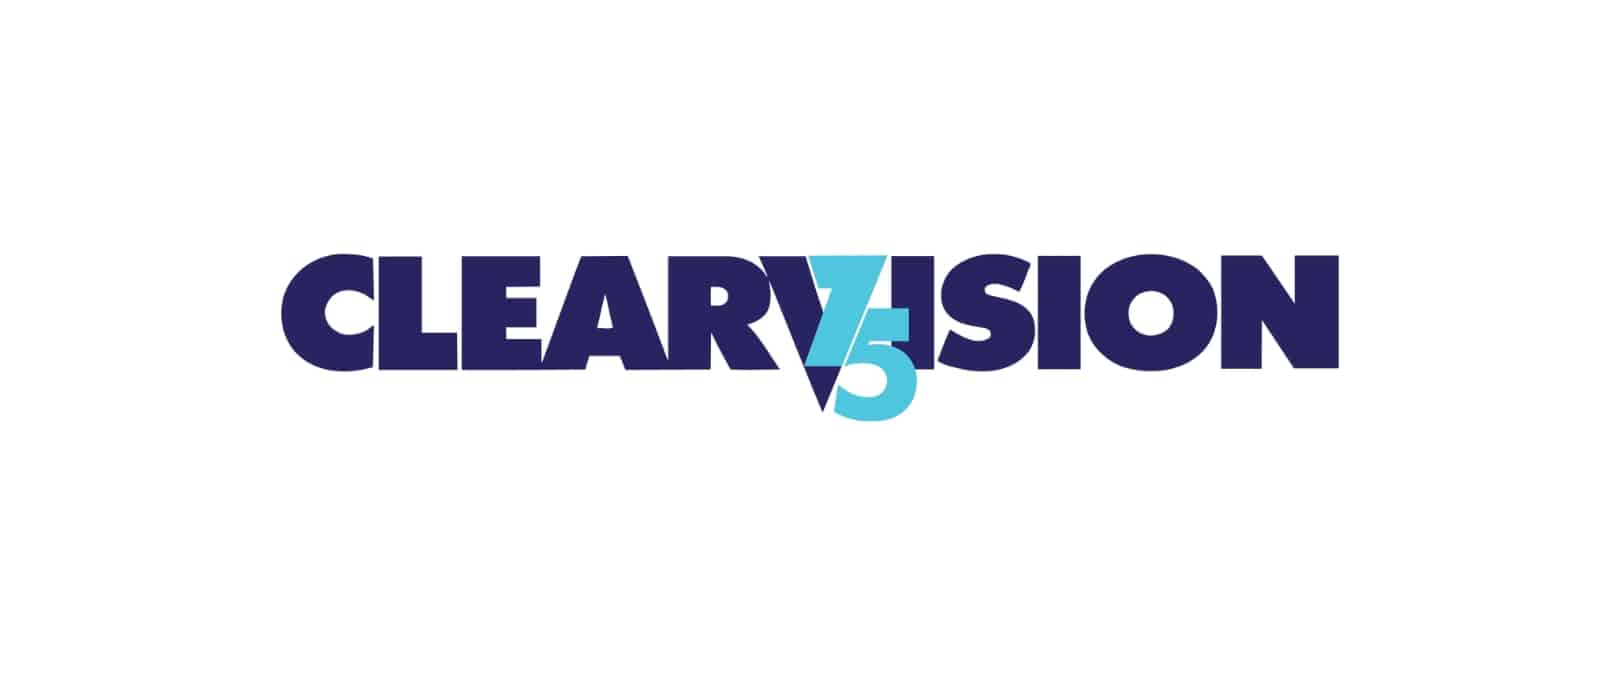 ClearVision 75th anniversary logo